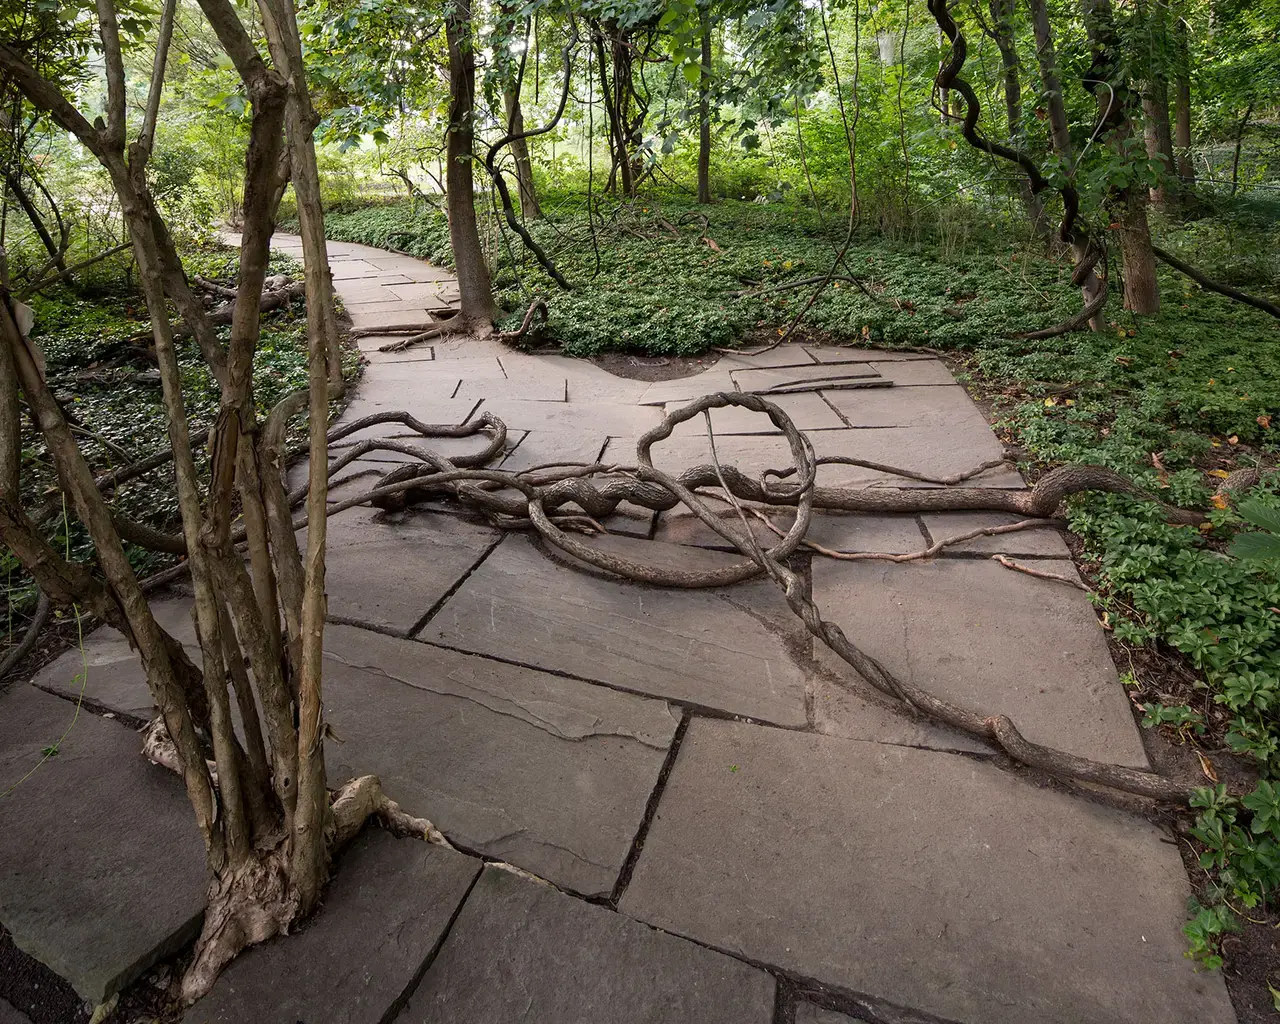 Winifred Lutz, Once Was, 2012, excavated and cleaned remains of bluestone path, with plant materials naturally occurring on site, path section about 4 feet wide and 60 feet long, upper level of site, Abington Art Center. Photo by Gregory Benson.